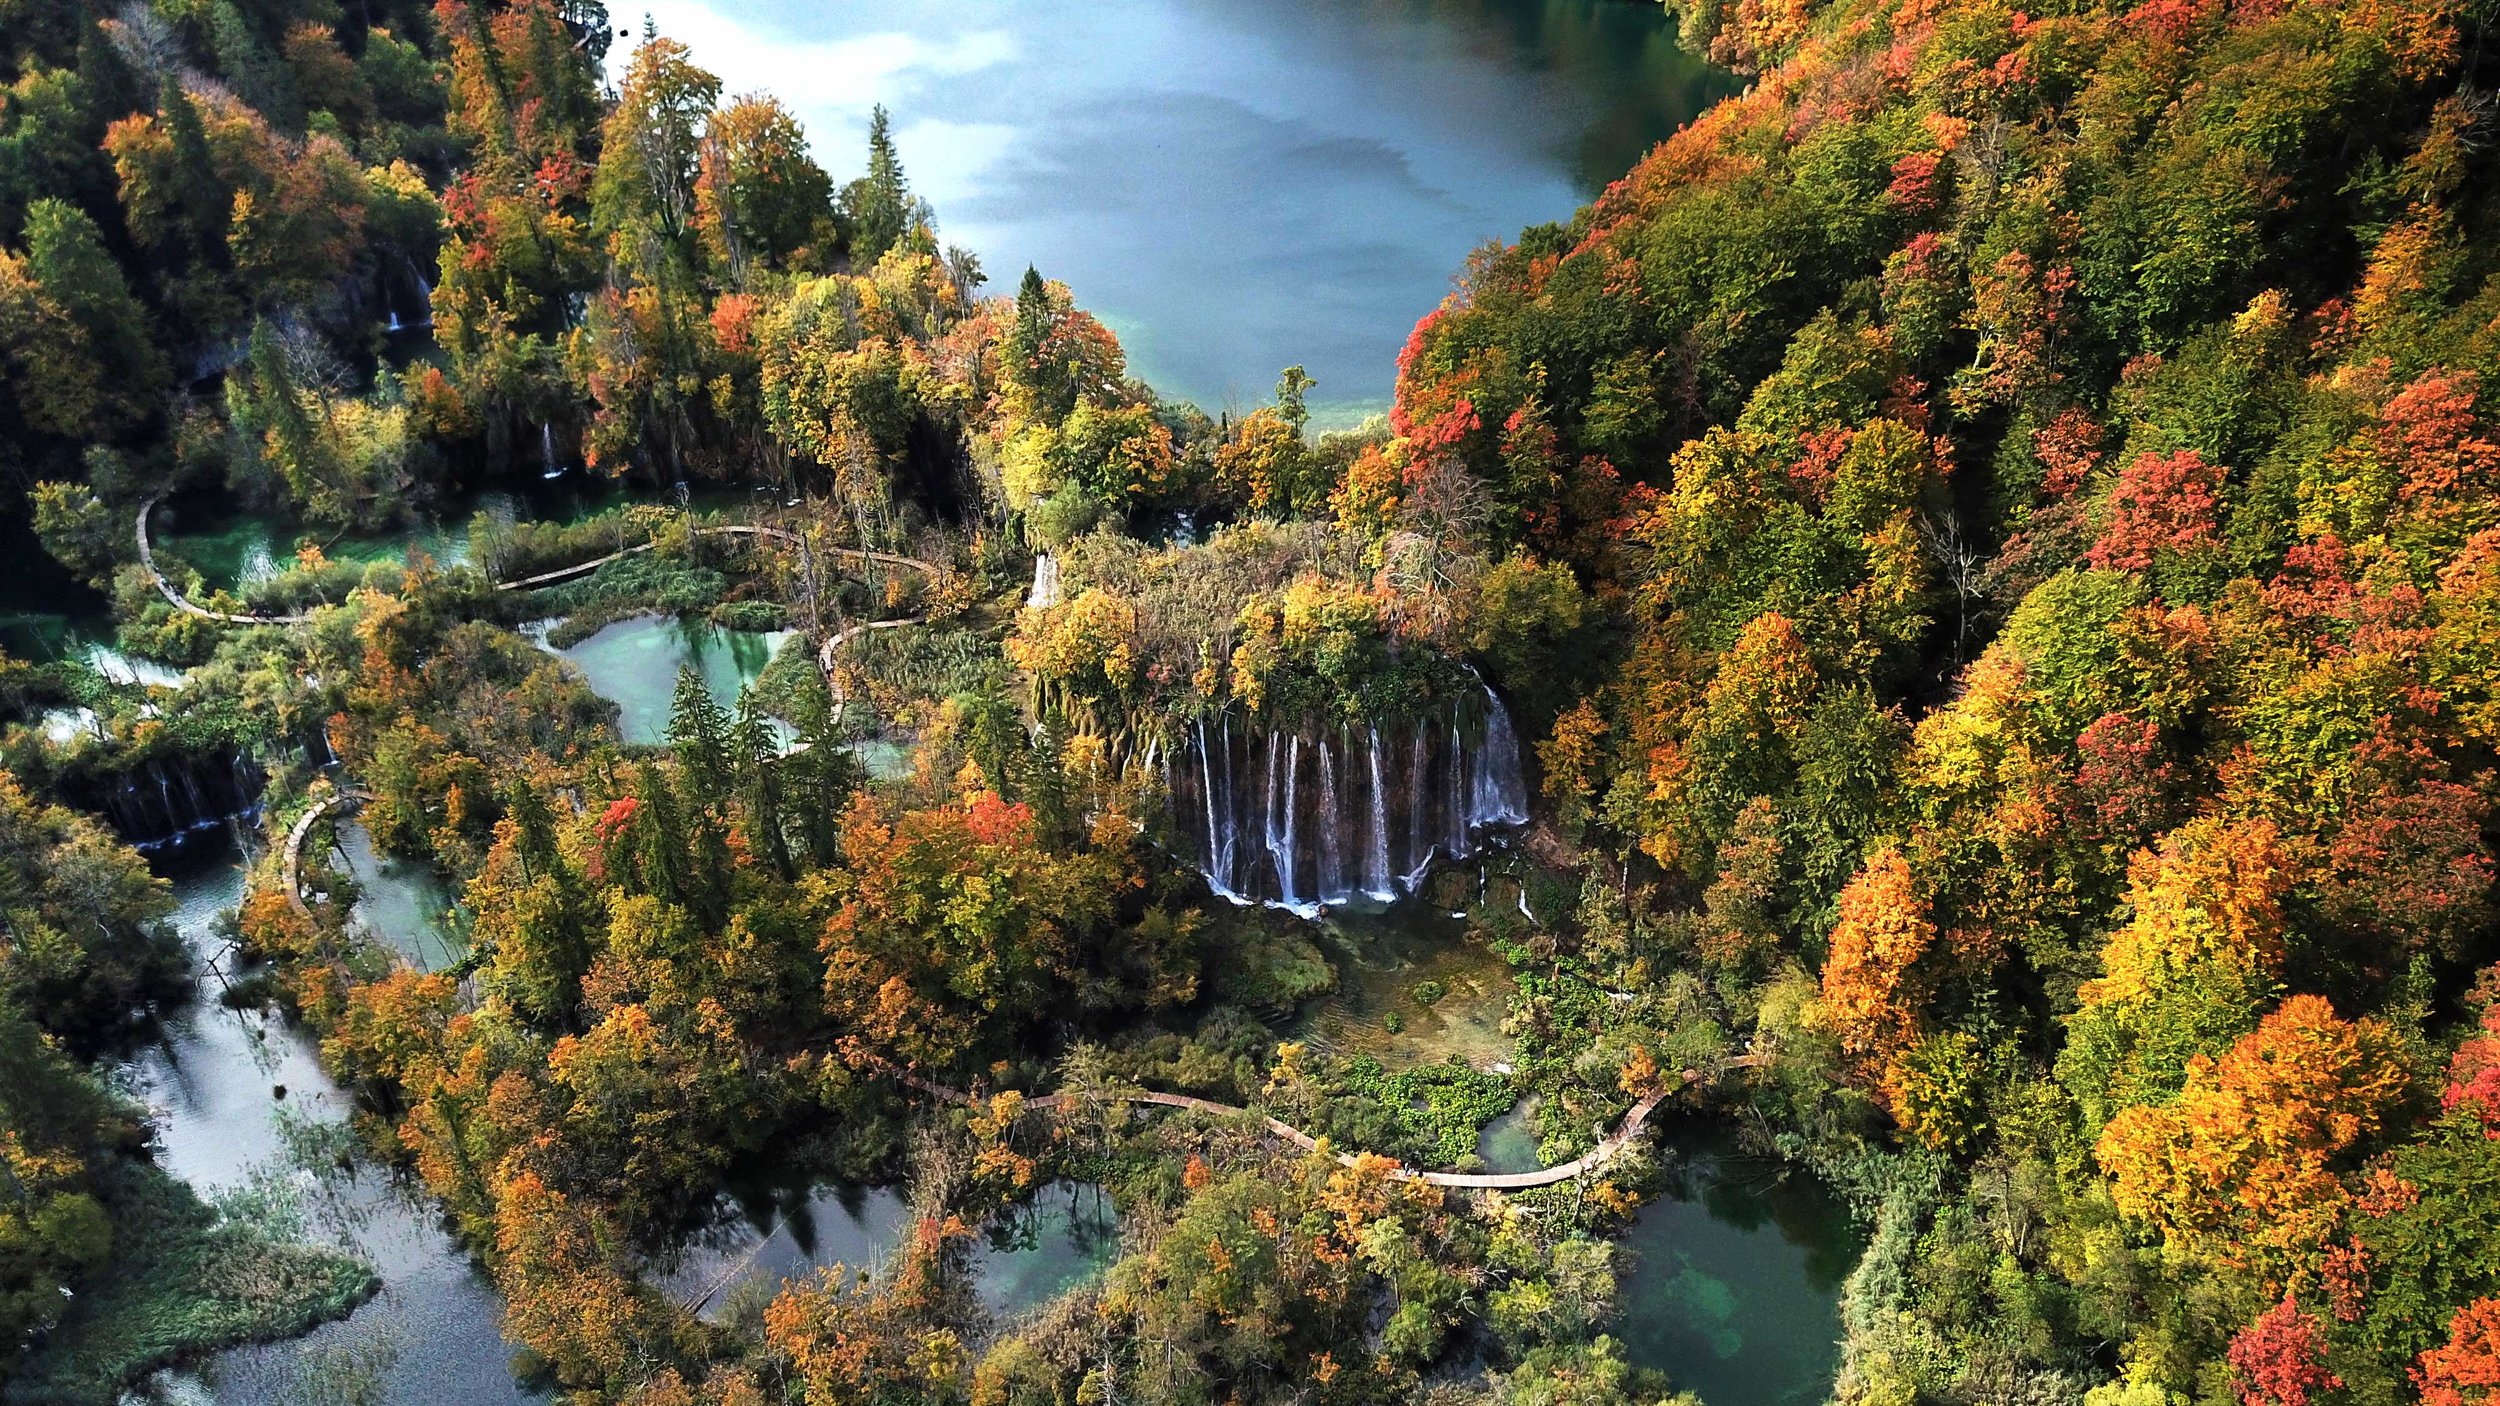 Aidan_Lincoln_Fowler_Drone_Aerial_Photography_Plitvice_Lakes_National_Park_Waterfalls_3